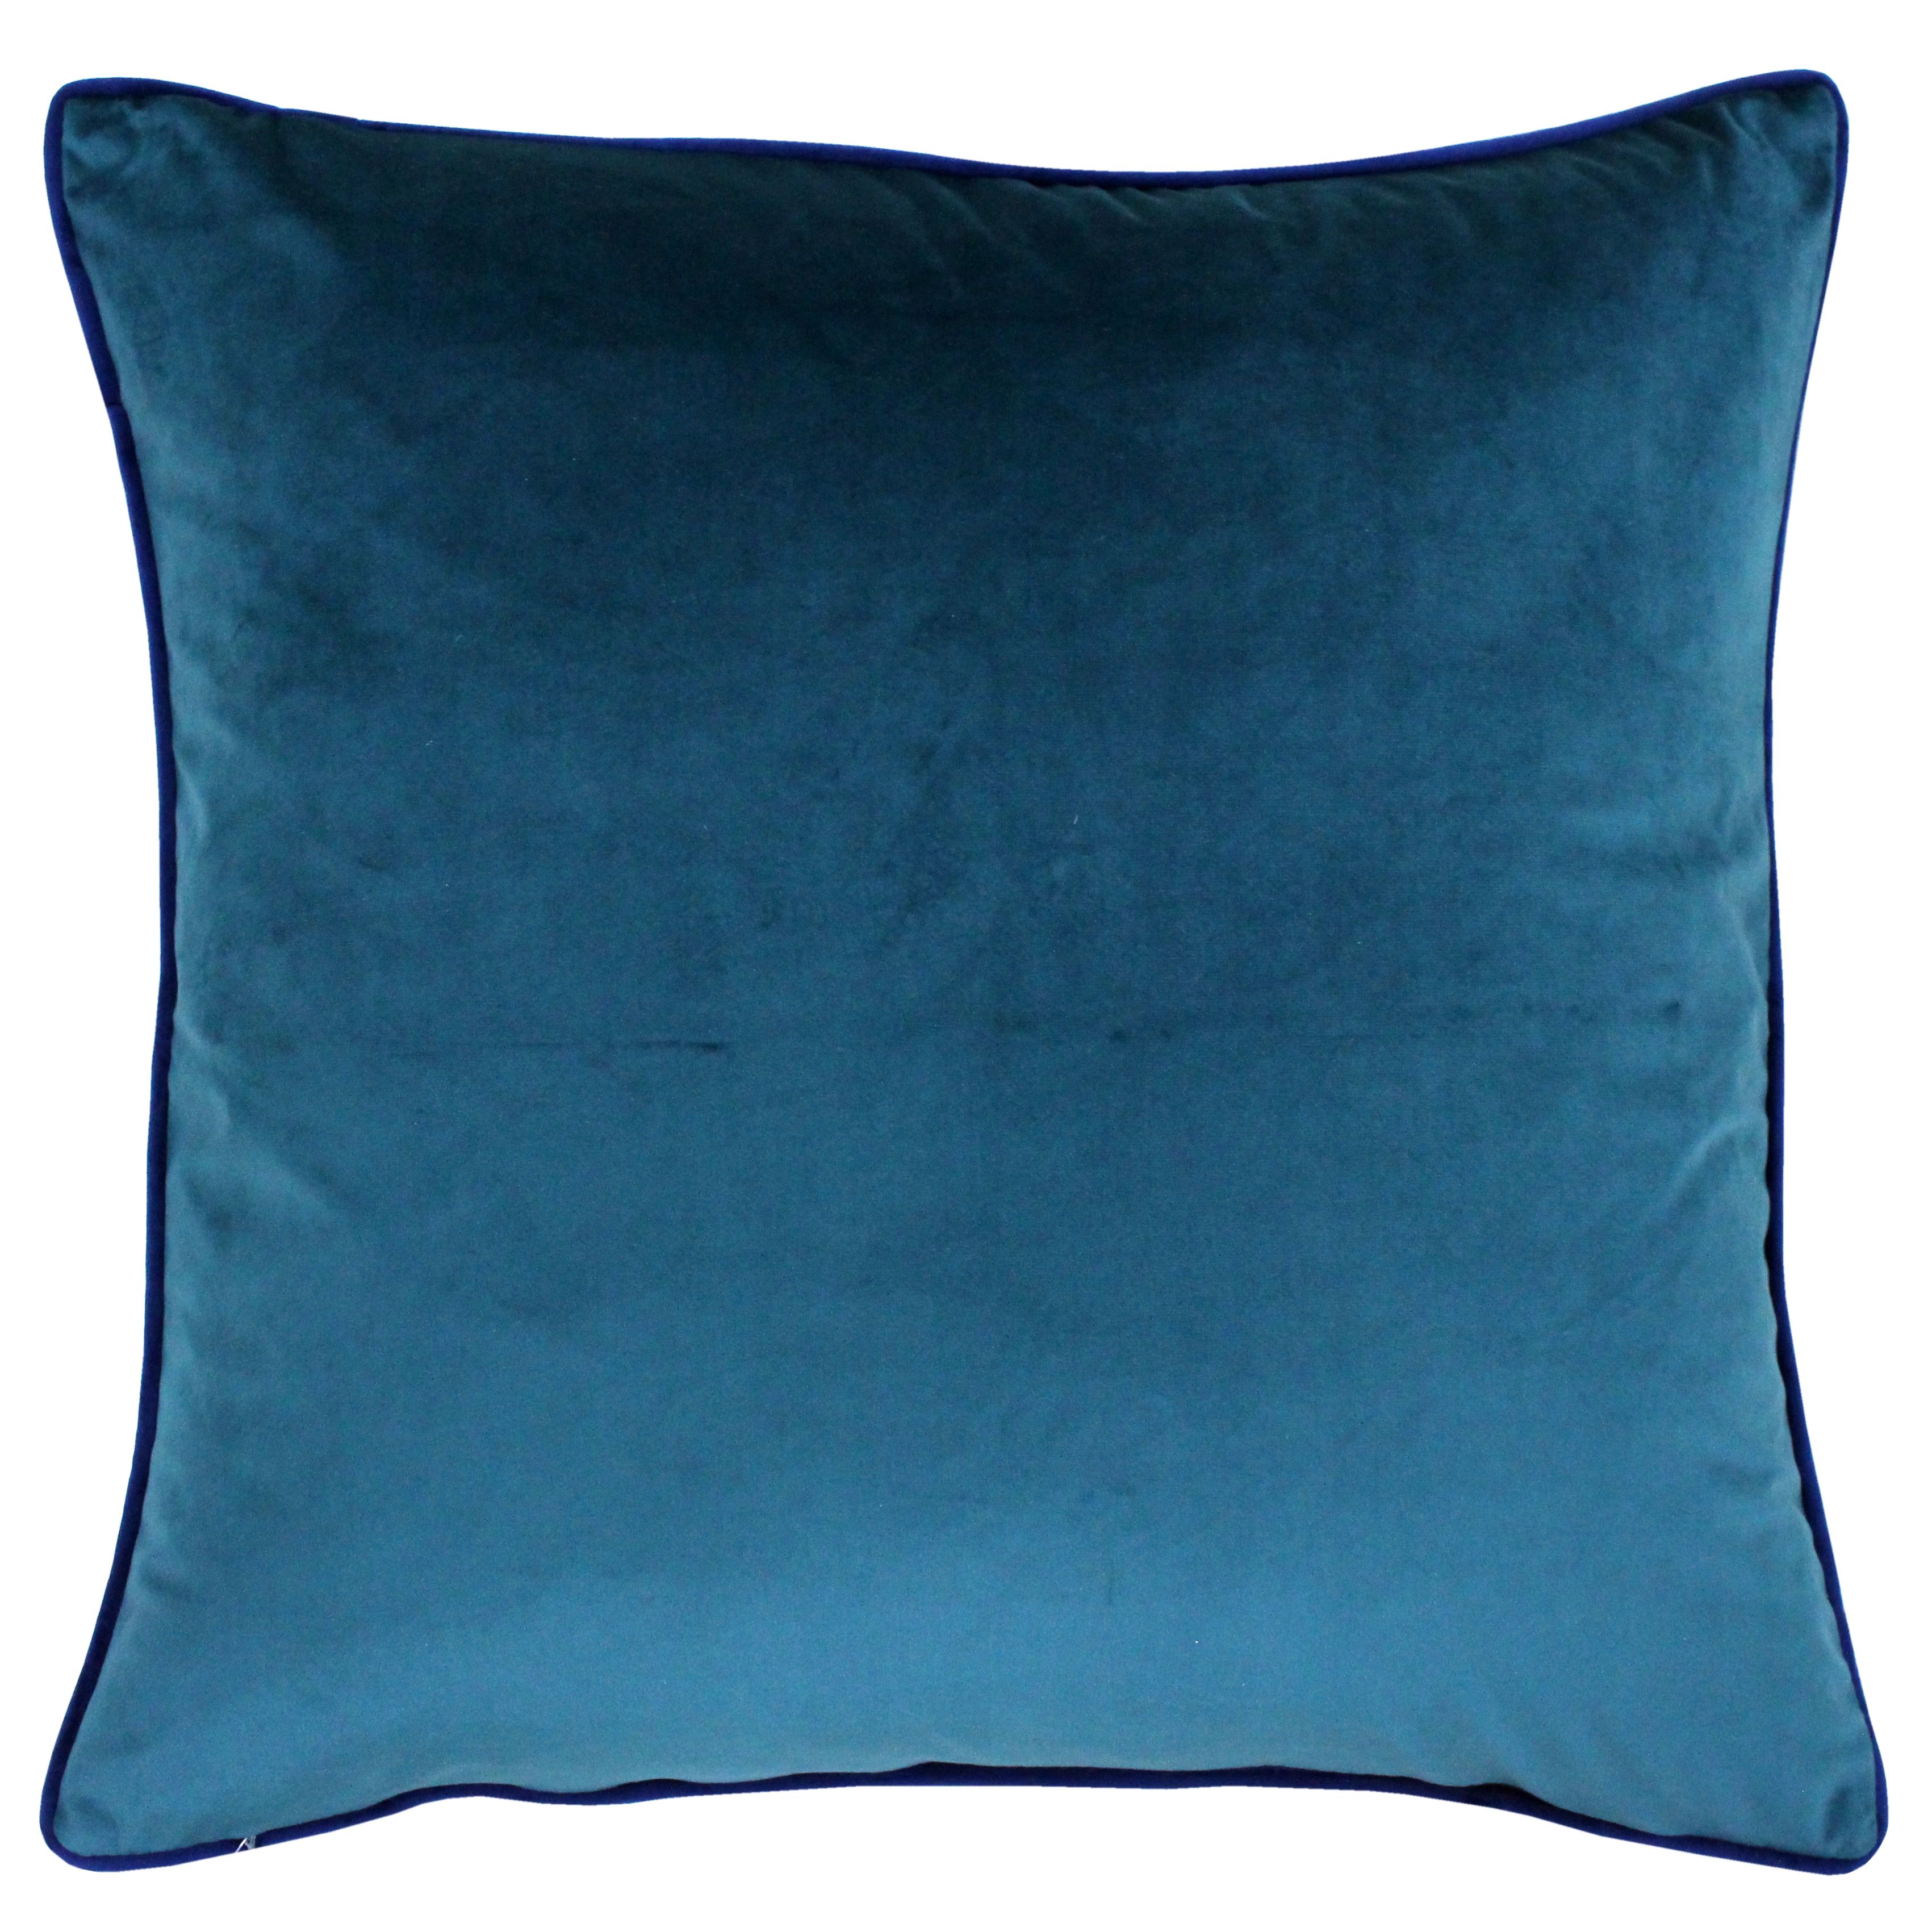 You need never worry about matching your cushions with the Meridian range. Made of unspeakably soft velvet feel fabric no words or pictures can do these covers justice. Each larger than average cushion has a plain front and reverse with contrasting piped edges in a range of rich complimentary colours which feature throughout the entire collection. With a small and discreet zip closure they are easy to fill and secure. These sumptuous Polyester Filled Cushions are made of 100% hard-wearing polyester and are incredibly easy to care for as they are all machine wash and iron appropriate.